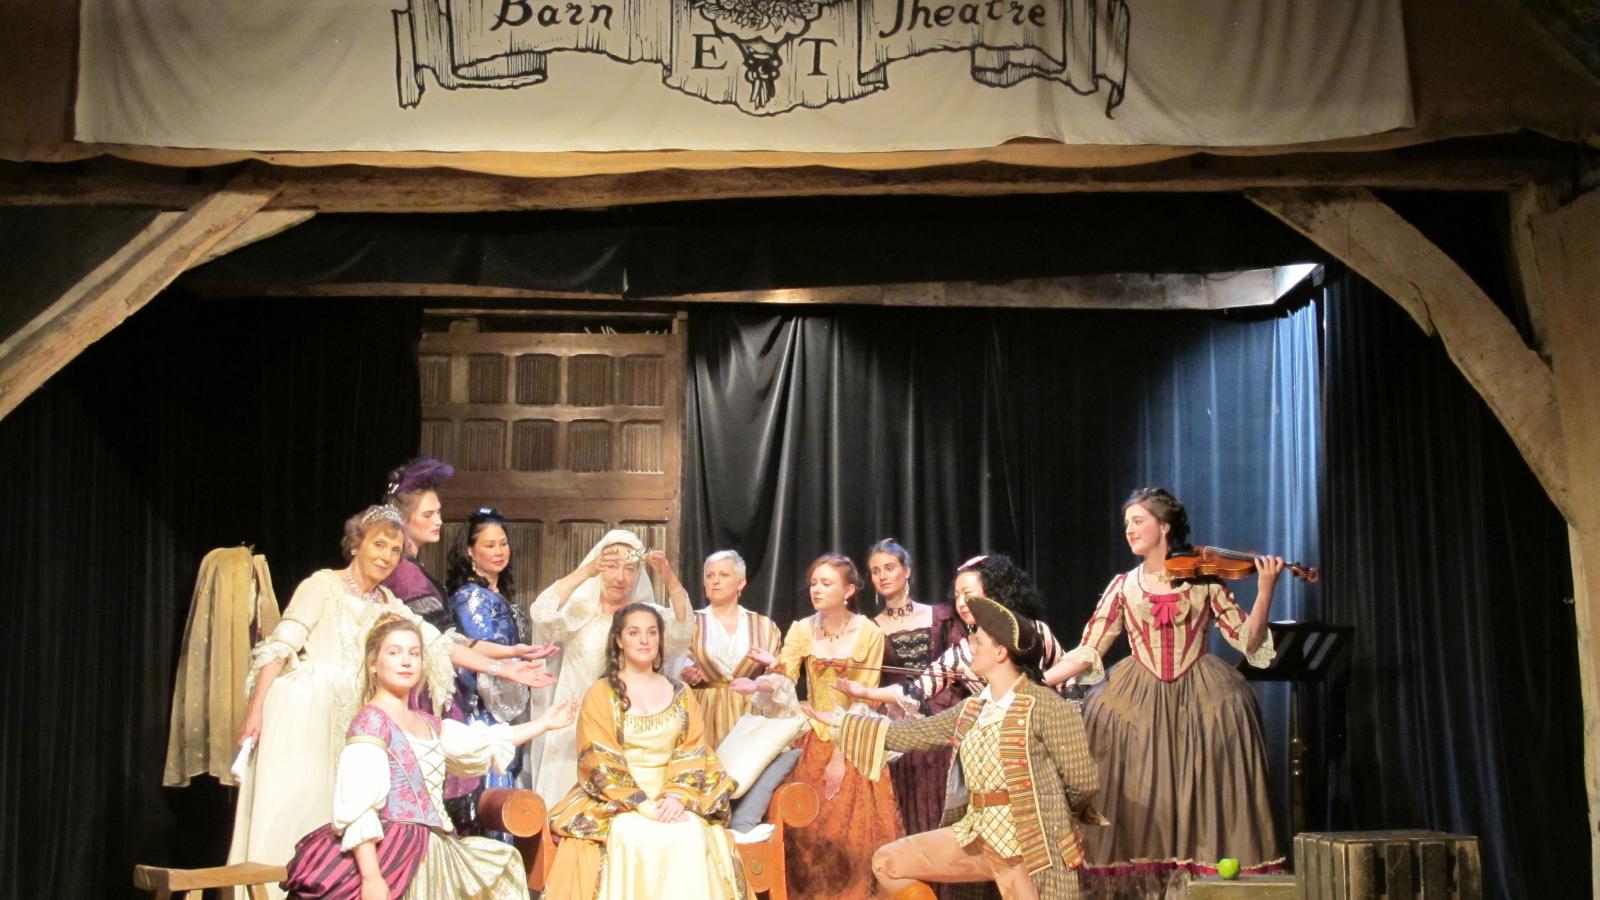 The full cast of women playing actresses from history in The First Actress on the stage of the Barn Theatre in Kent (Photo: Palindrome Productions).